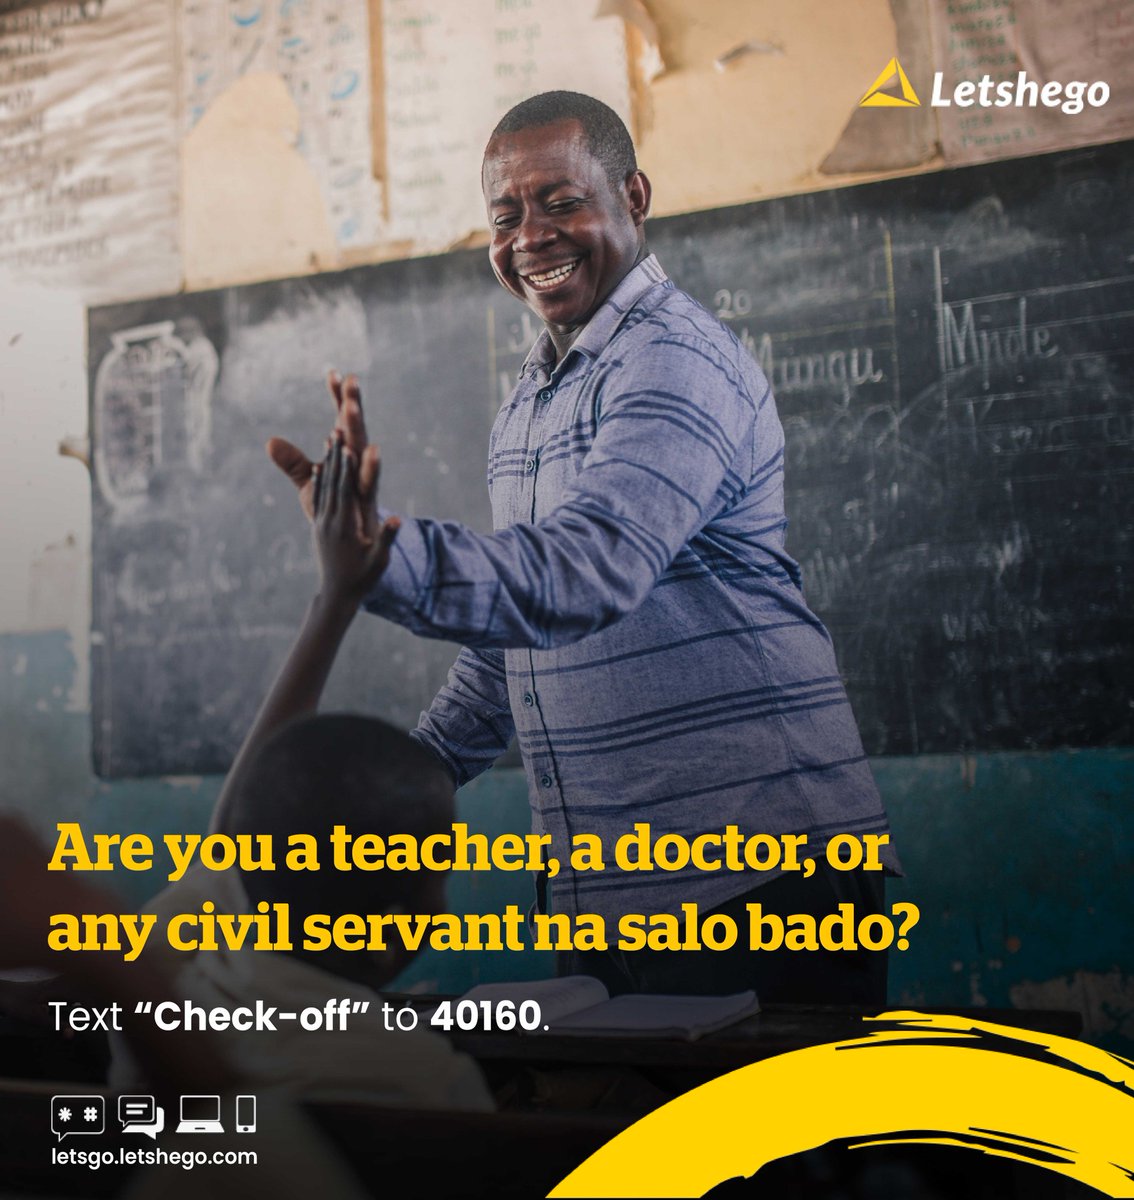 Salo kukuwalate isikustress. Enjoy April holiday yako , get our Salary Check Off Loan today. Unlock up to 3 million in just 24 hours with 96 months repayment. Text “Check-off” to 40160 or dial 0730 687 777 today. #Letshego #SalaryCheckOff